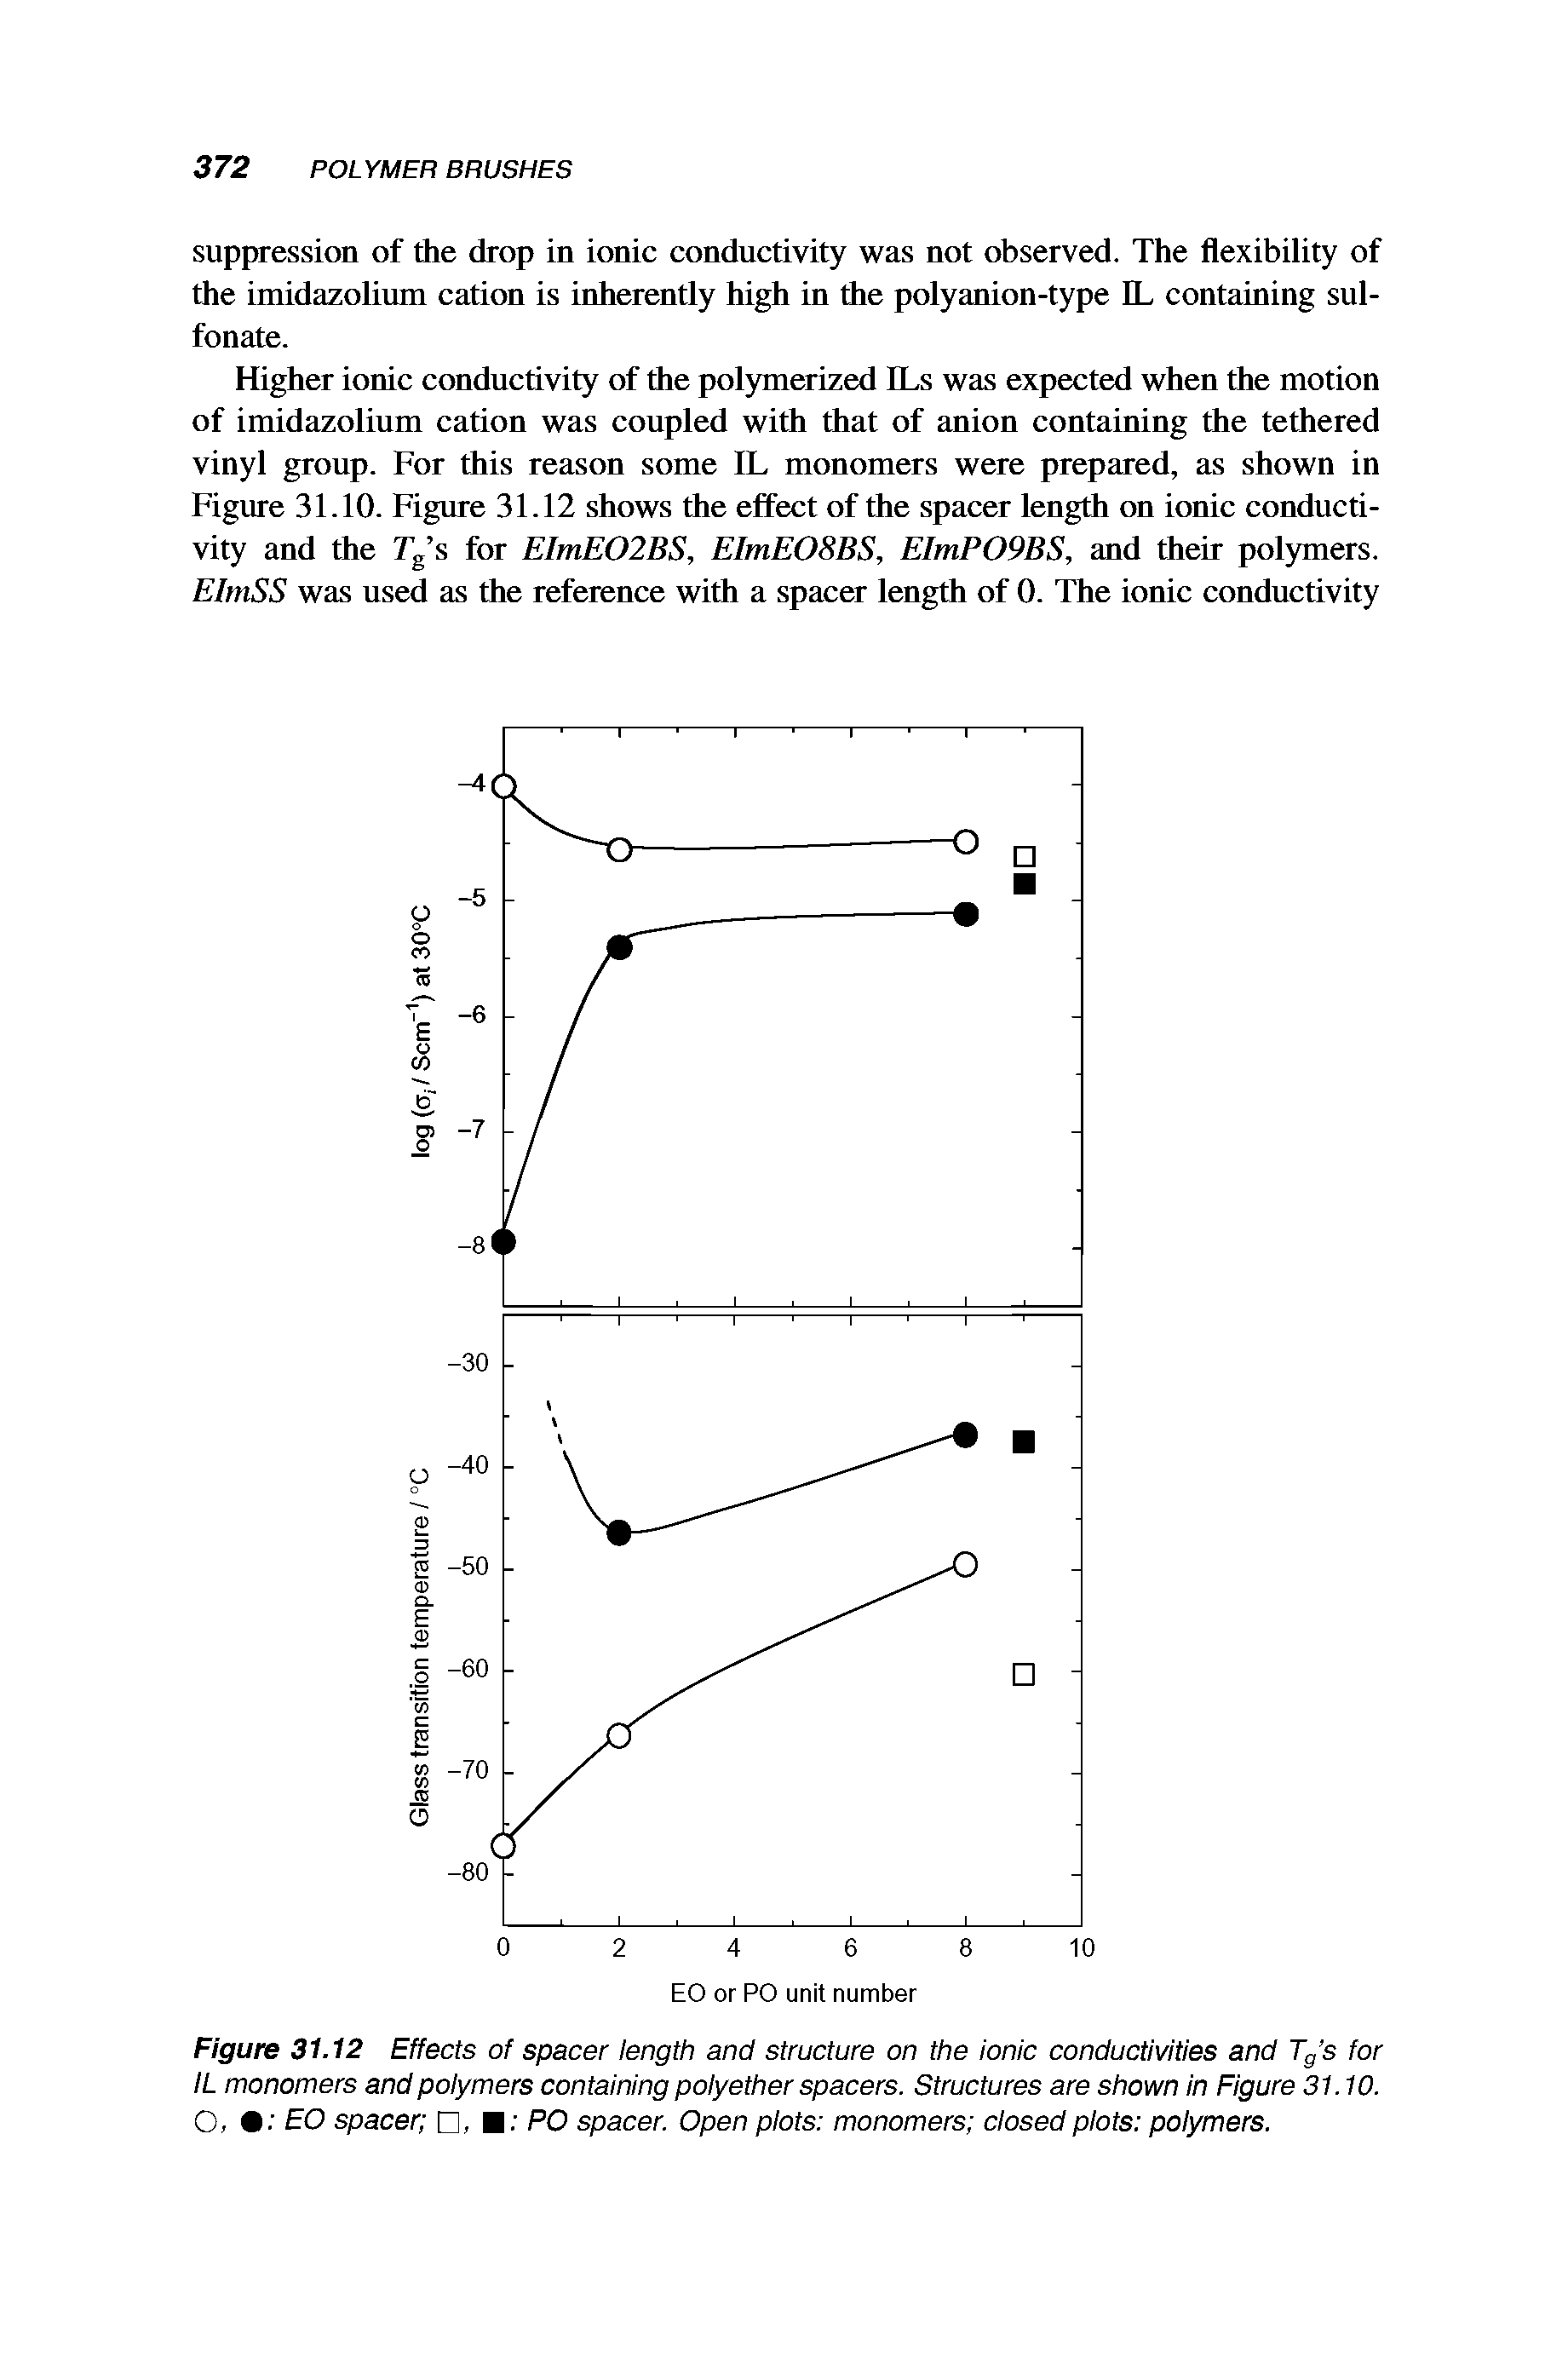 Figure 31.12 Effects of spacer length and structure on the ionic conductivities and Tg s for IL monomers and polymers containing polyether spacers. Structures are shown in Figure 31.10. O, EO spacer , PO spacer. Open plots monomers closed plots polymers.